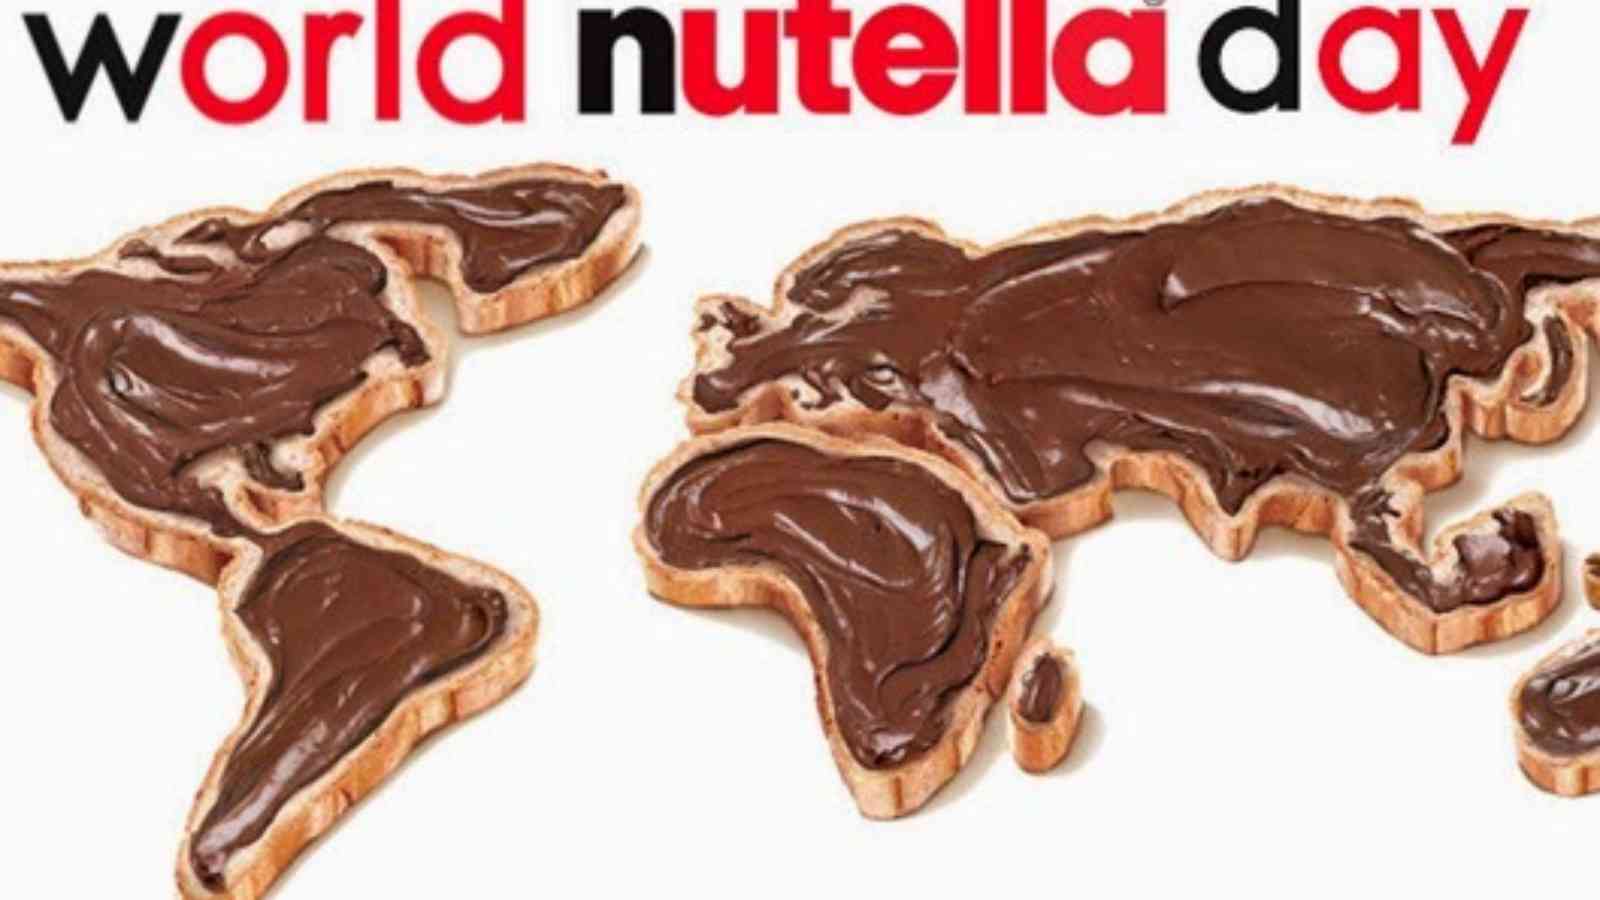 World Nutella Day 2023: Date, History and Celebration